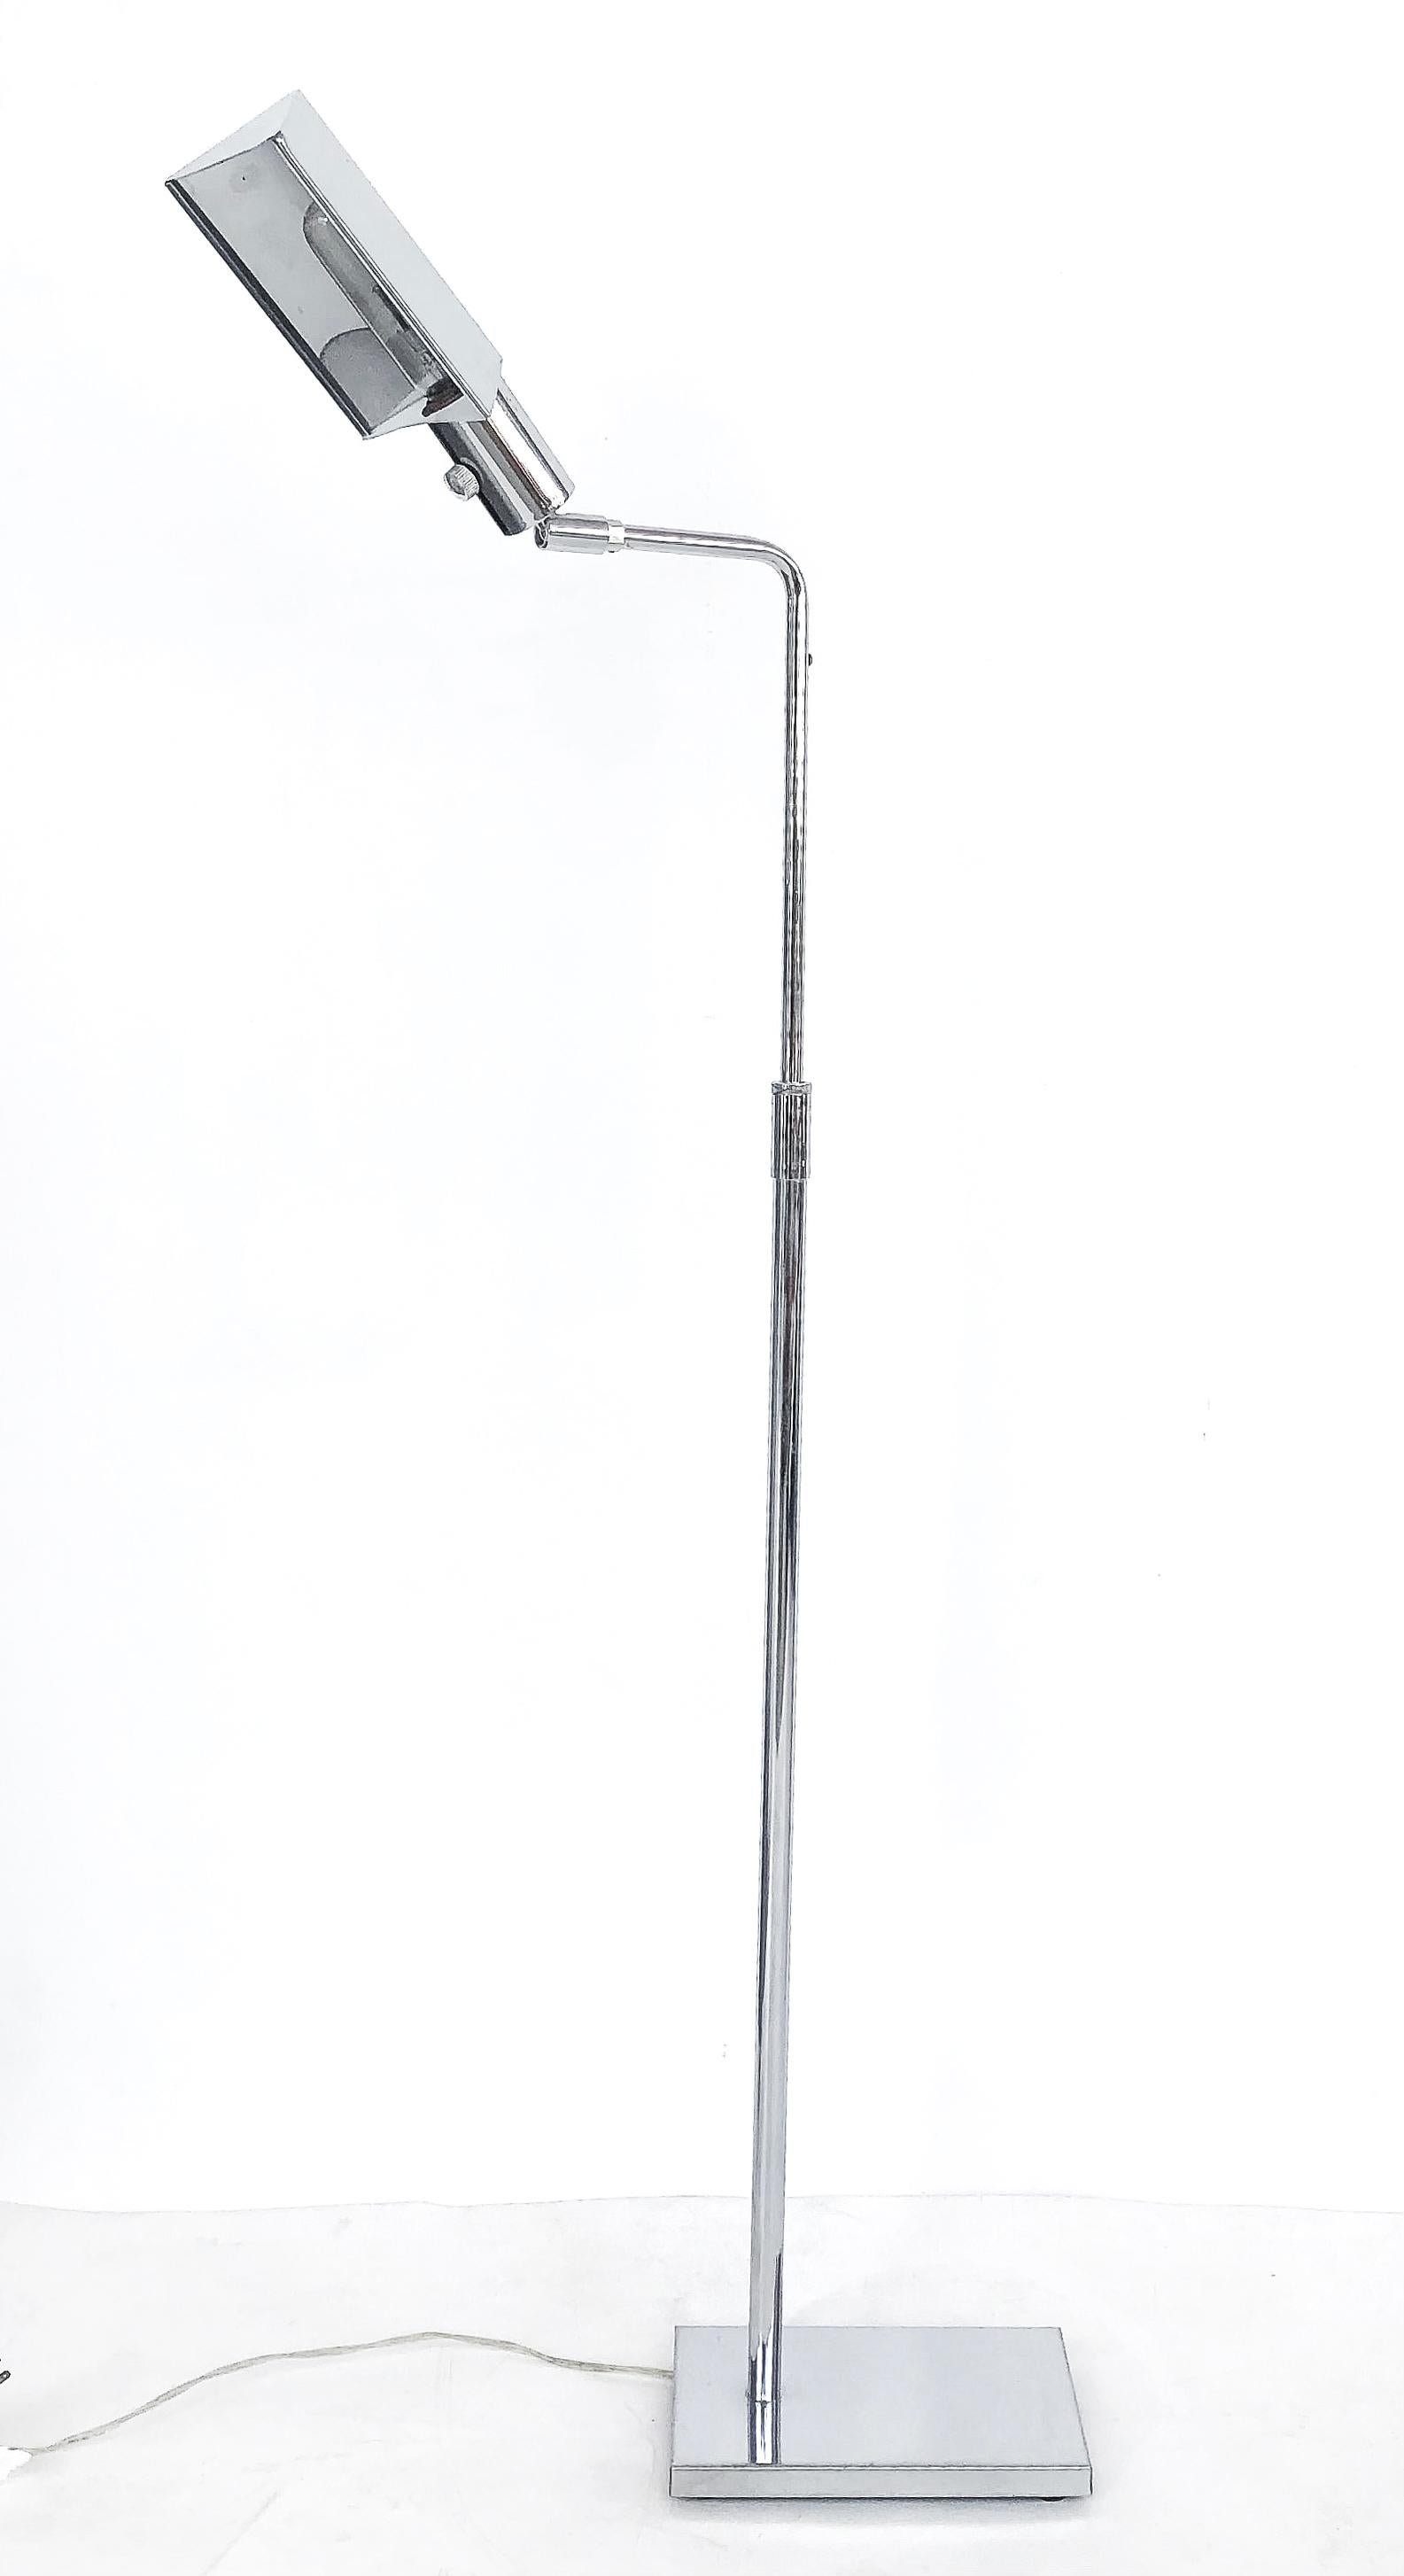 Vintage Hansen NY chrome adjustable floor lamp

Offered for sale is a vintage Hanson chrome floor lamp with an adjustable head. The lamp is marked behind the head. The base is rectangular and there are some losses to the chrome on the neck of the